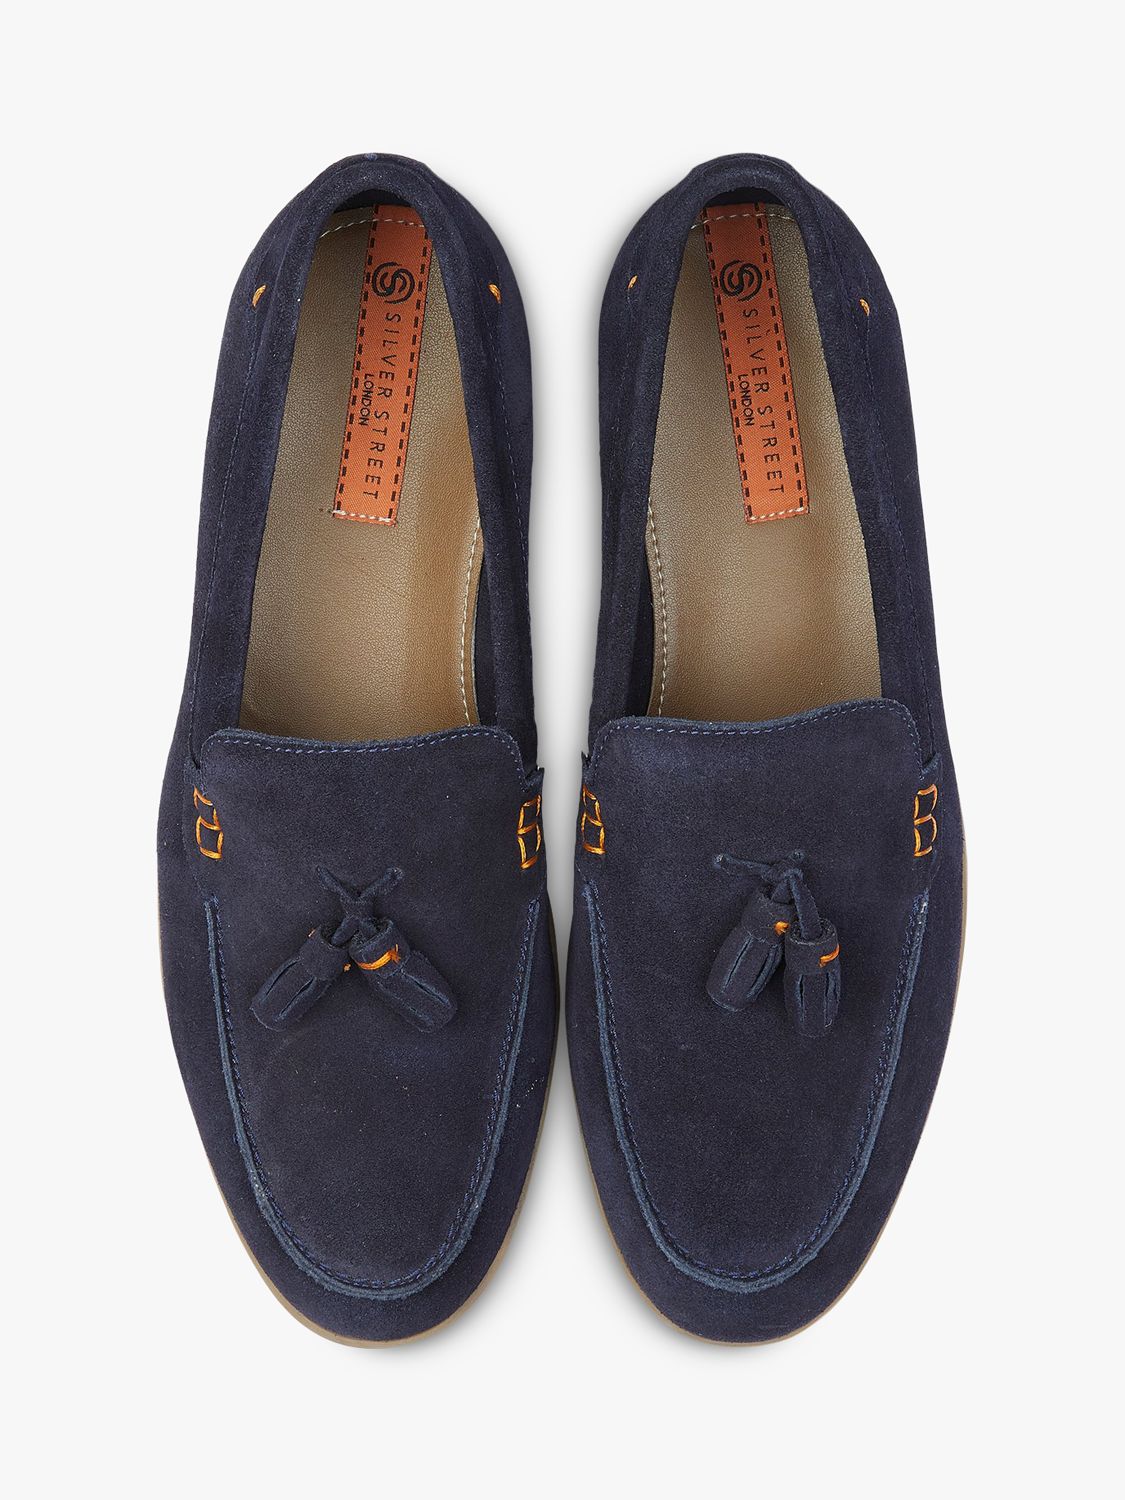 Silver Street London Wembley Suede Loafers, Navy at John Lewis & Partners